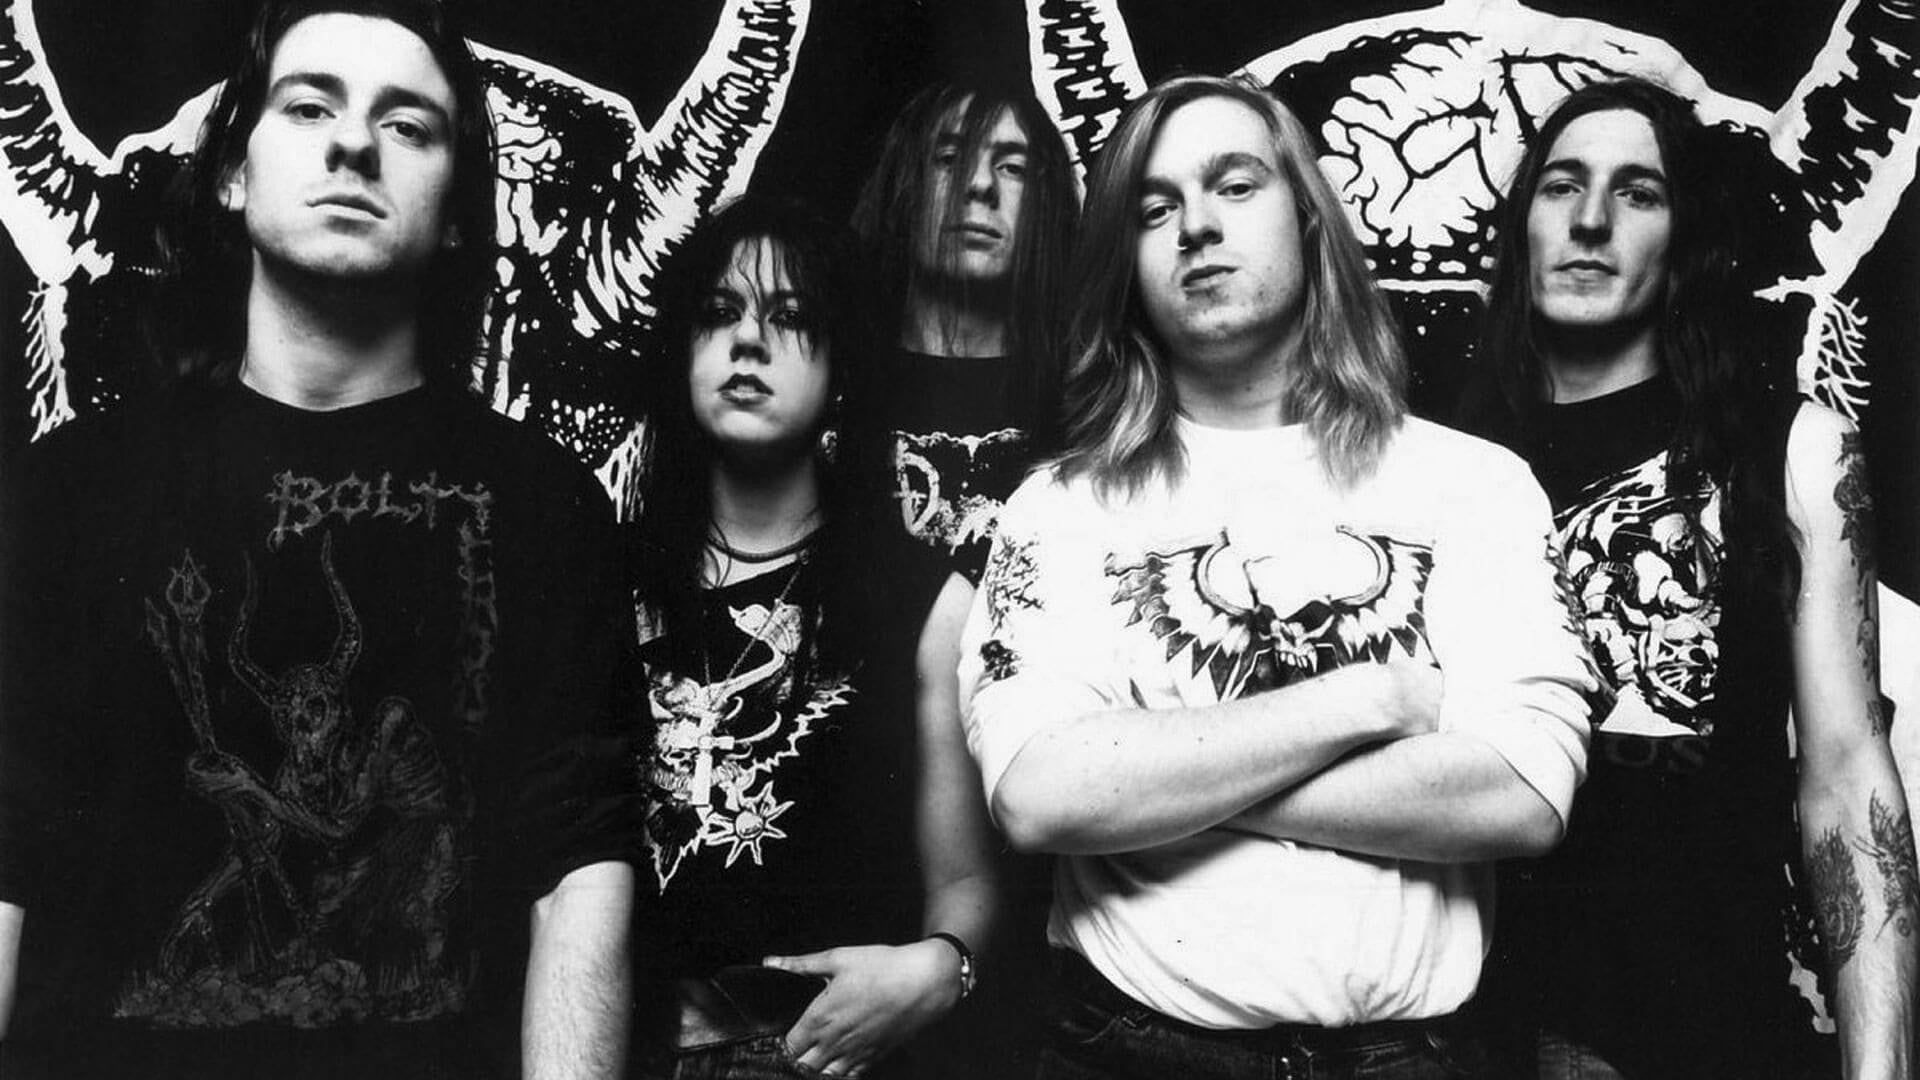 29 Years Ago: BOLT THROWER release In Battle There is No Law (Early Band History)